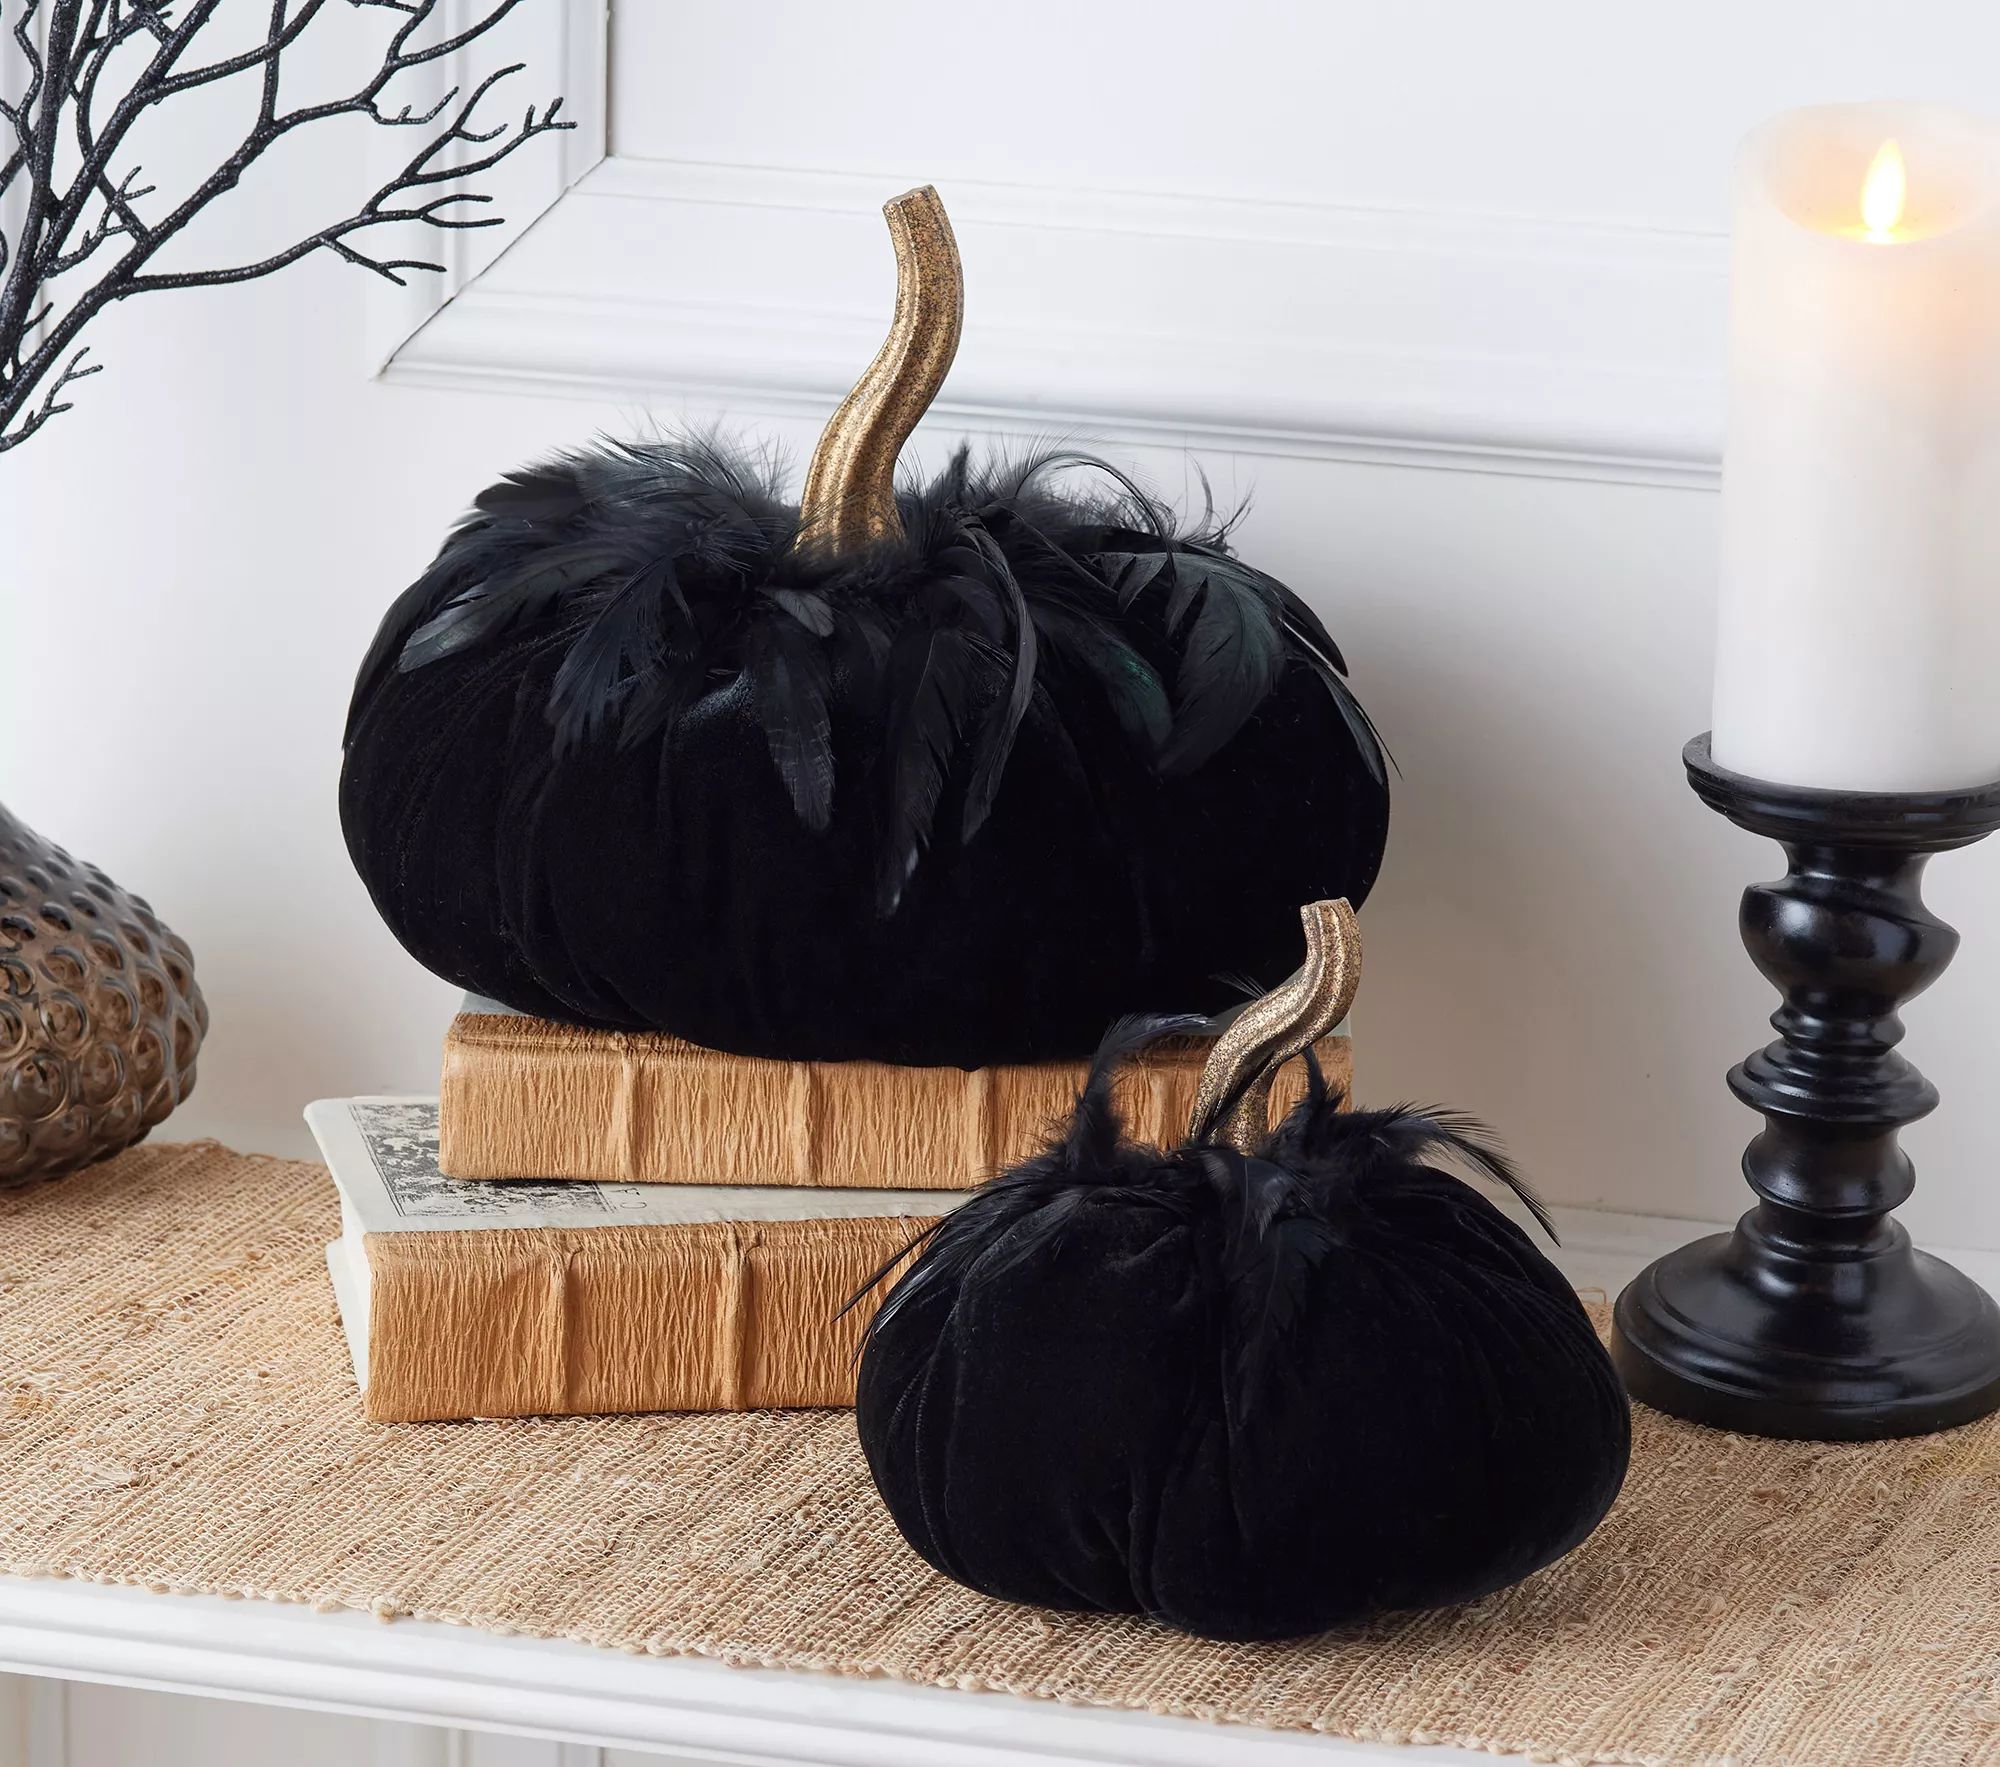 Simply Stunning Set of 2 Feathered Pumpkins by Janine Graff | QVC